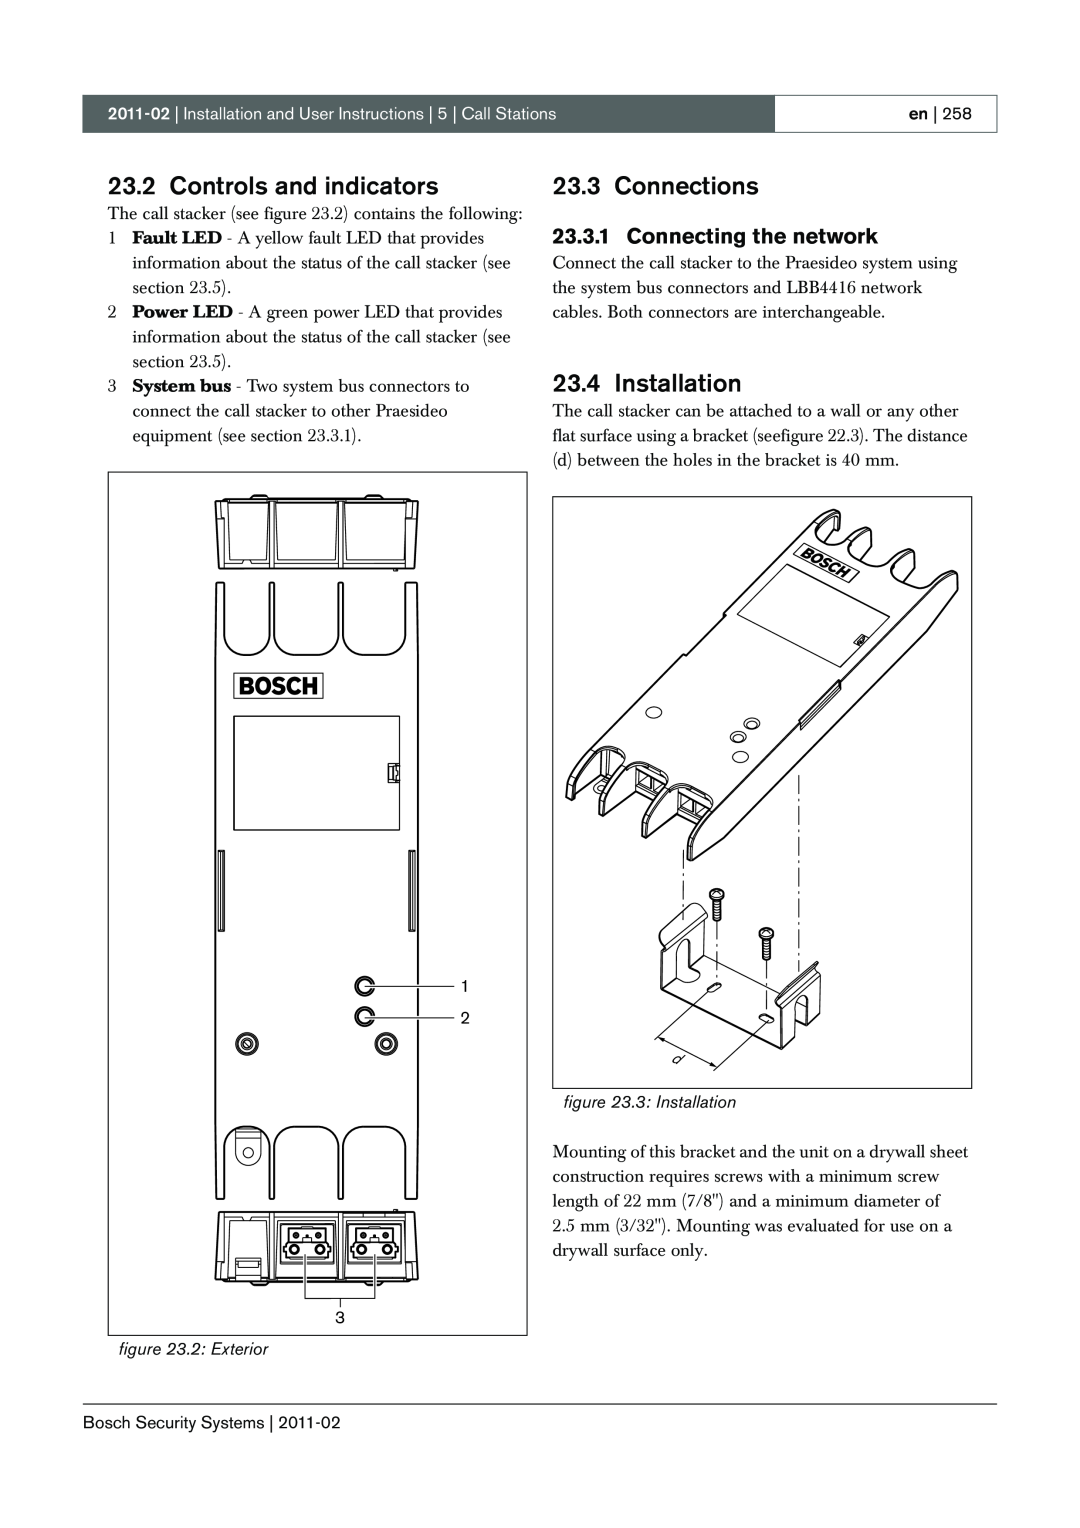 Bosch Appliances 3.5 manual Controls and indicators, Connections, Installation, Connecting the network, 2: Exterior 